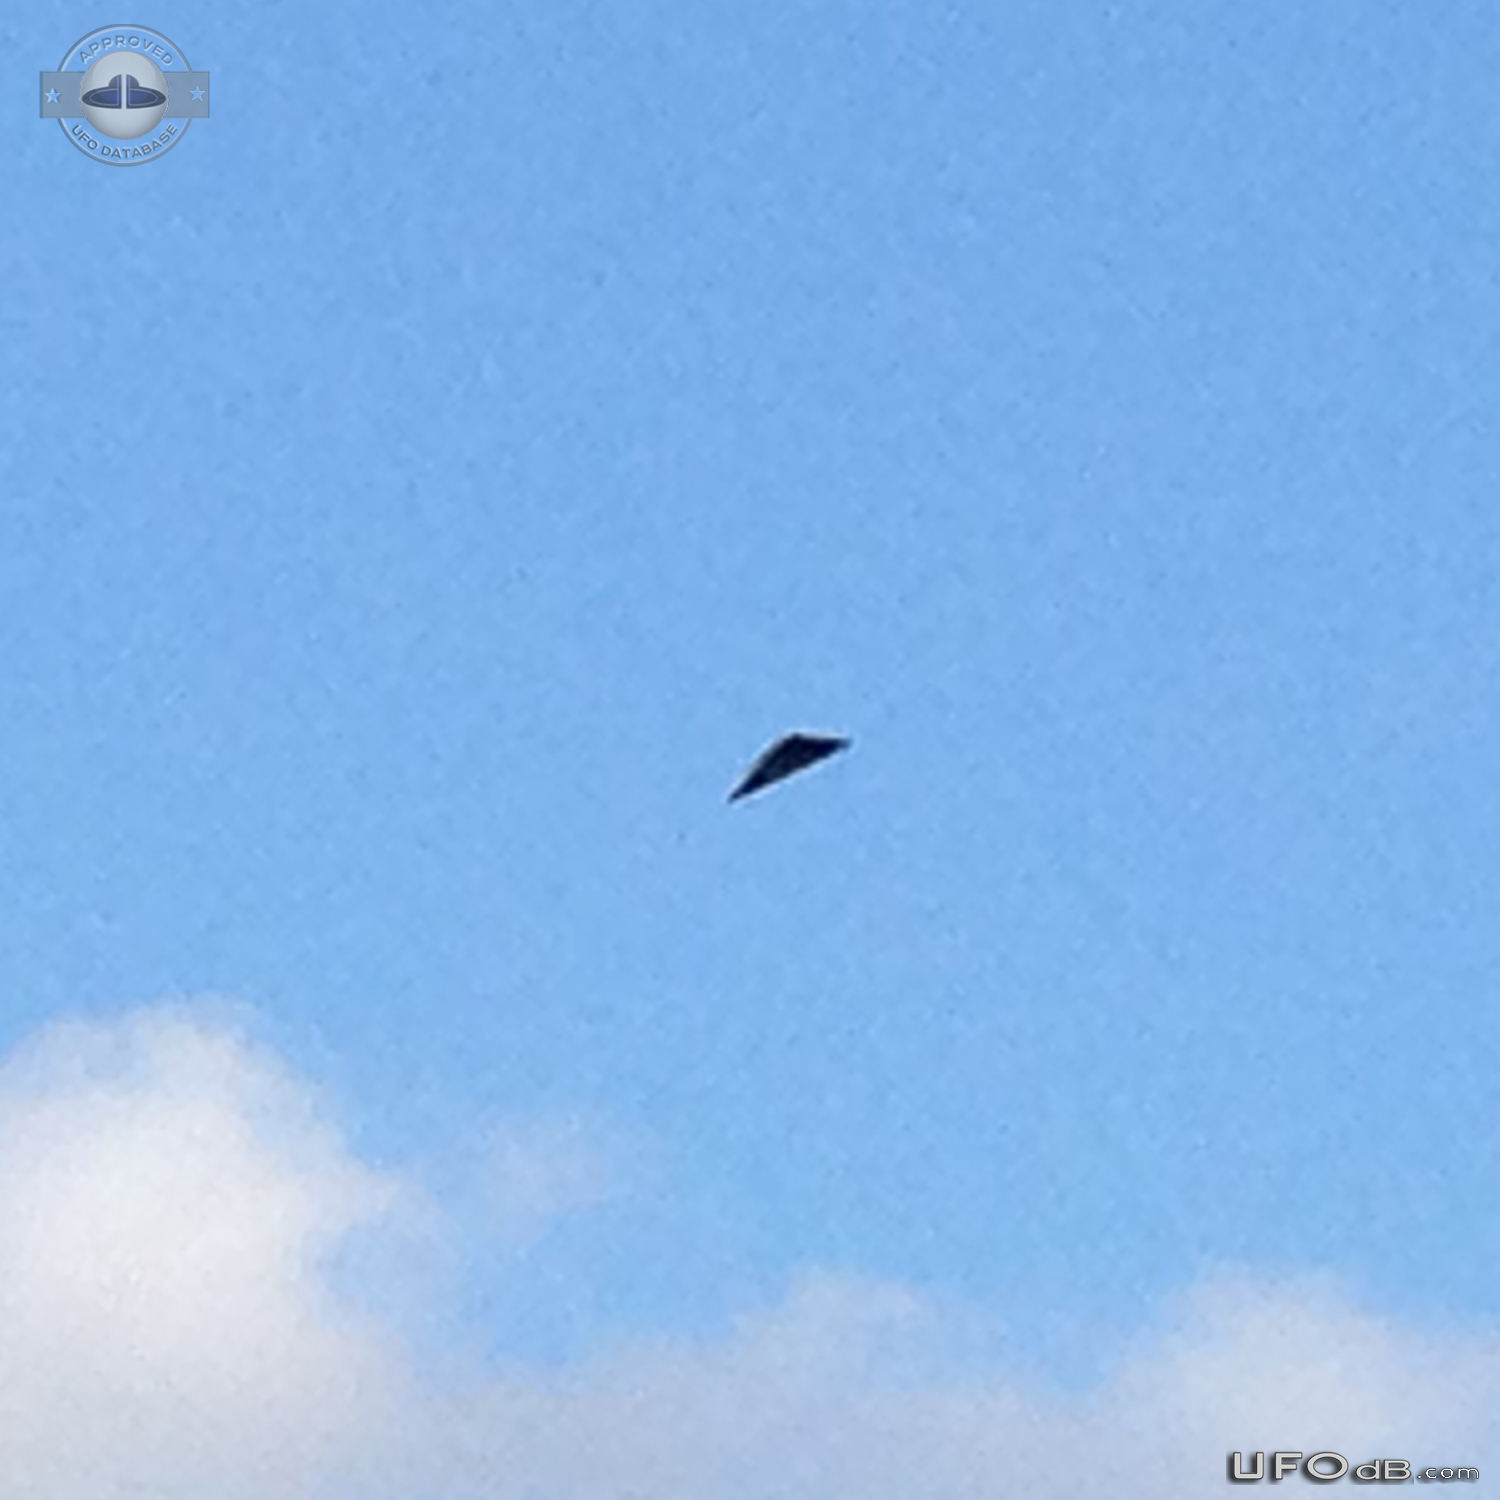 Triangular object hovering in Sky and did not move while observed - Au UFO Picture #736-5